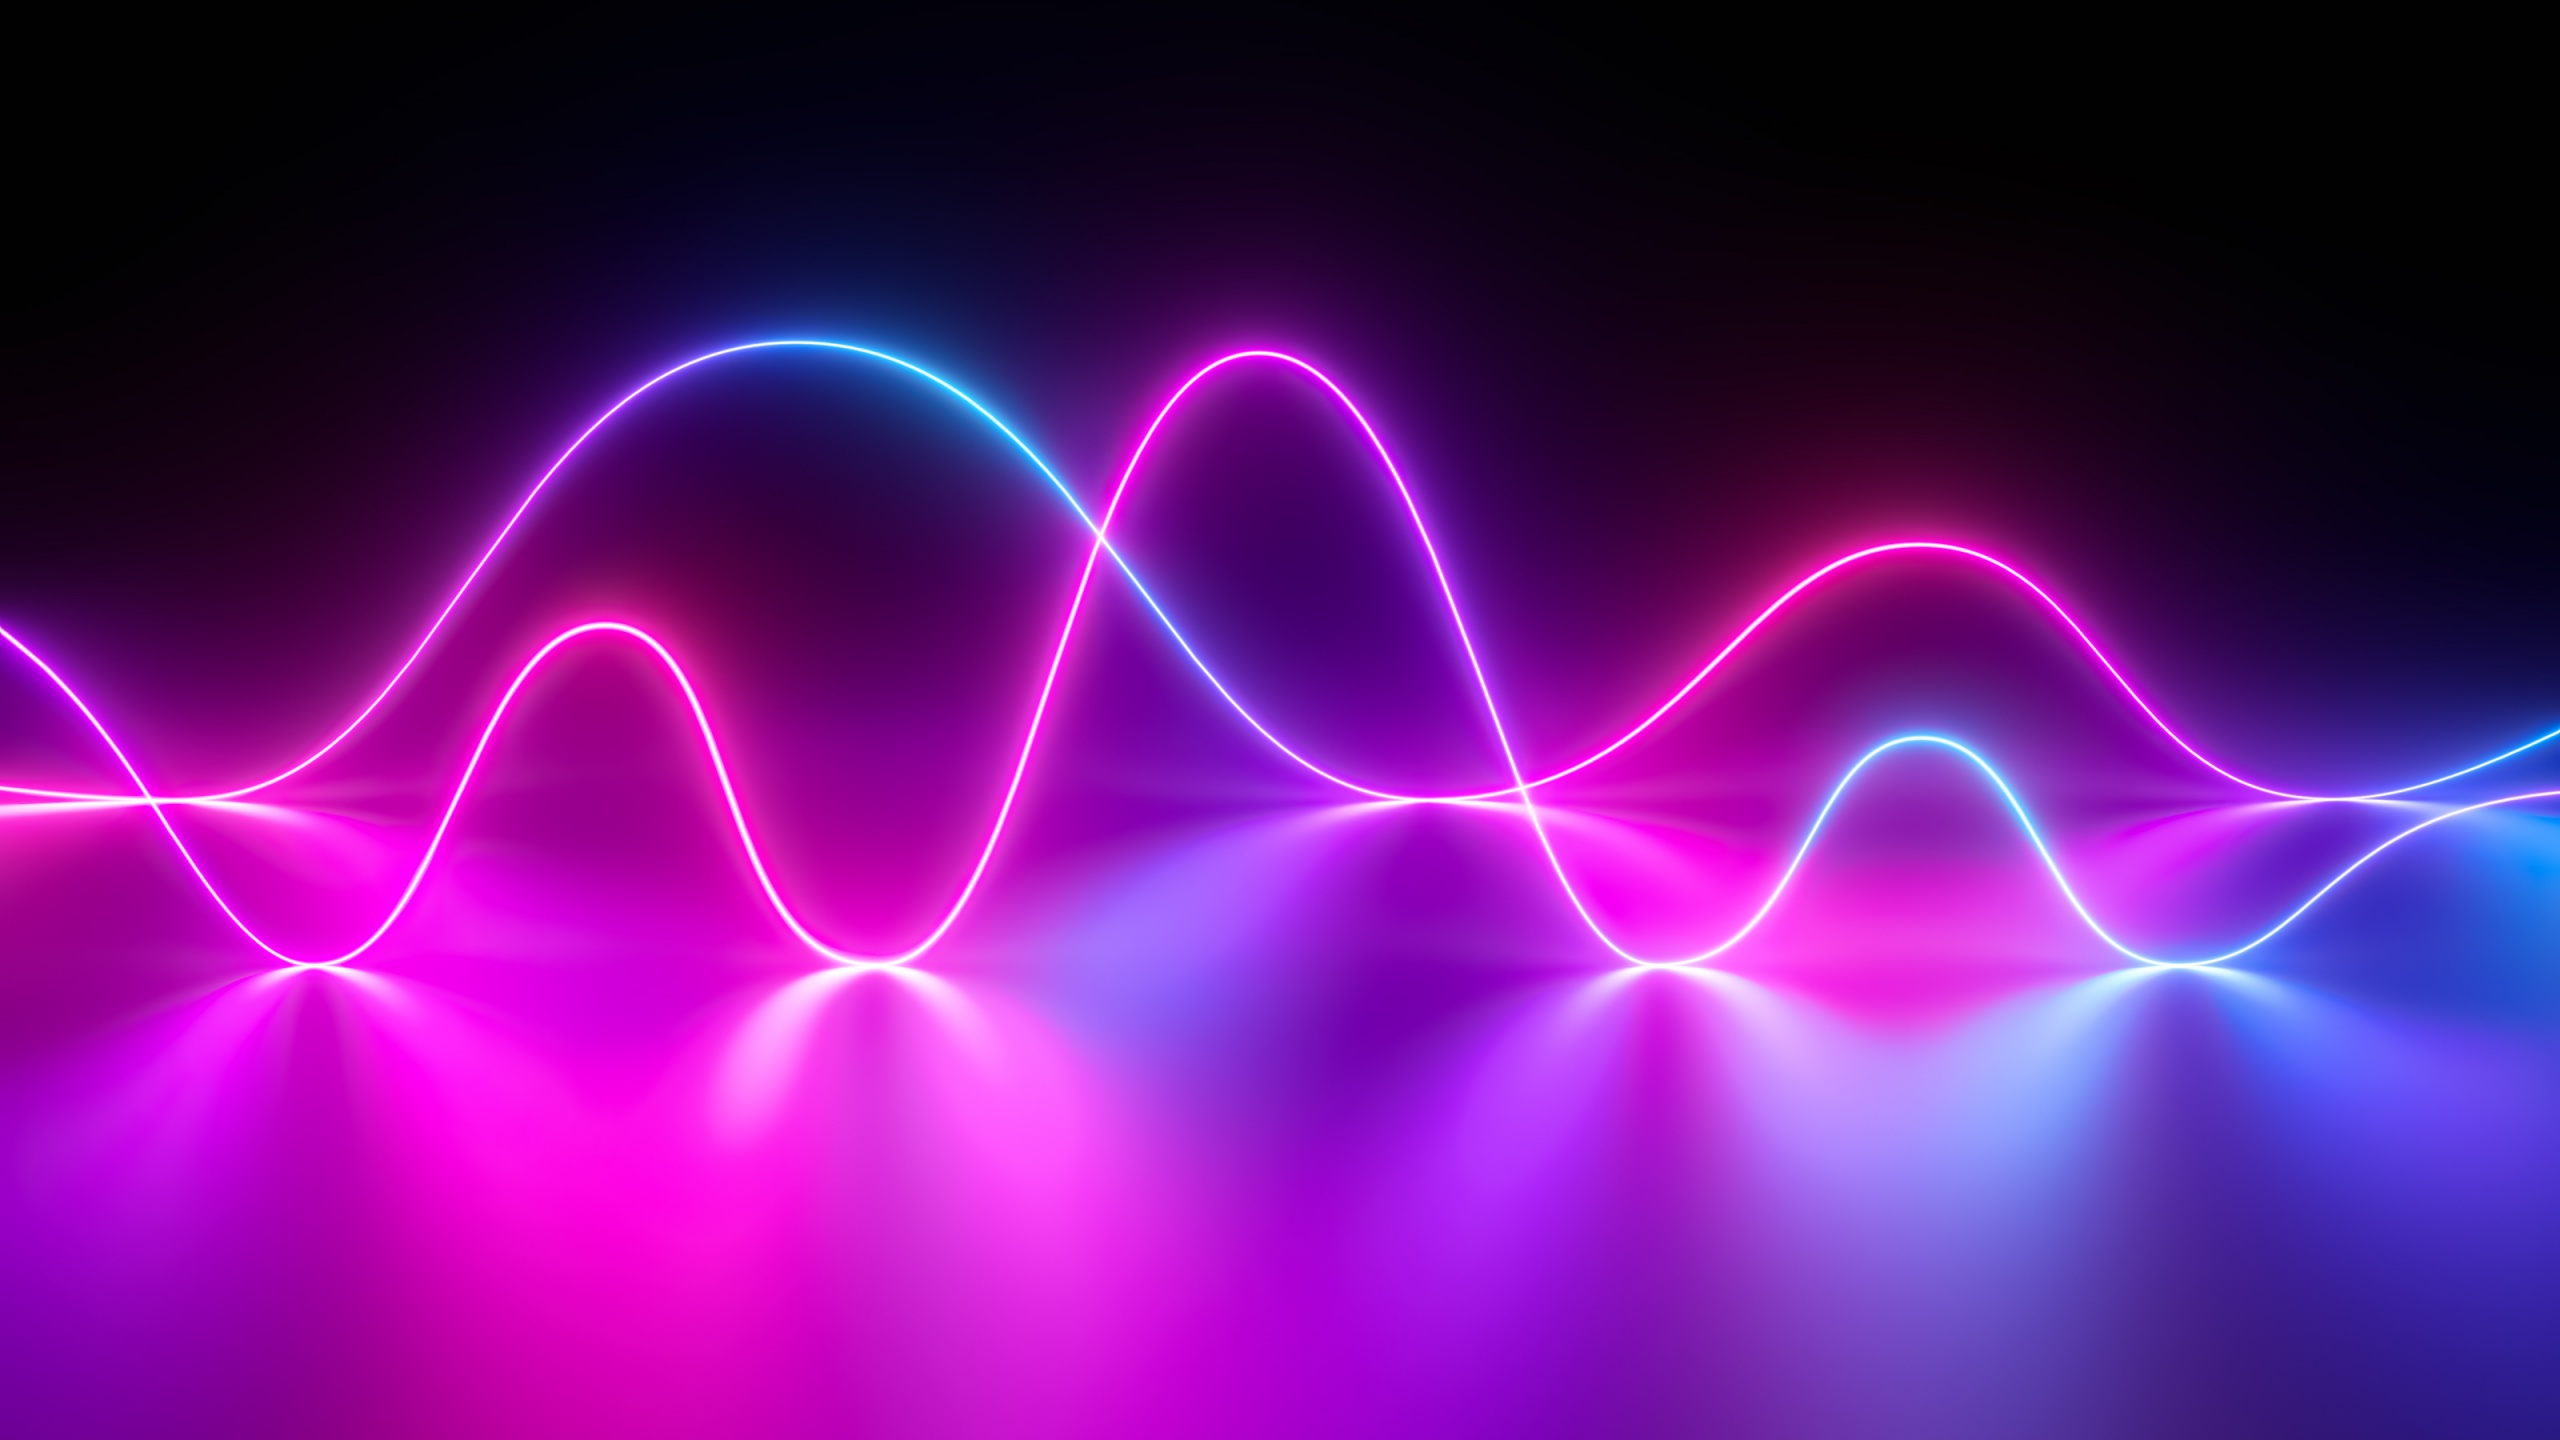 Abstract Neon Curved Reflection 2560x1440